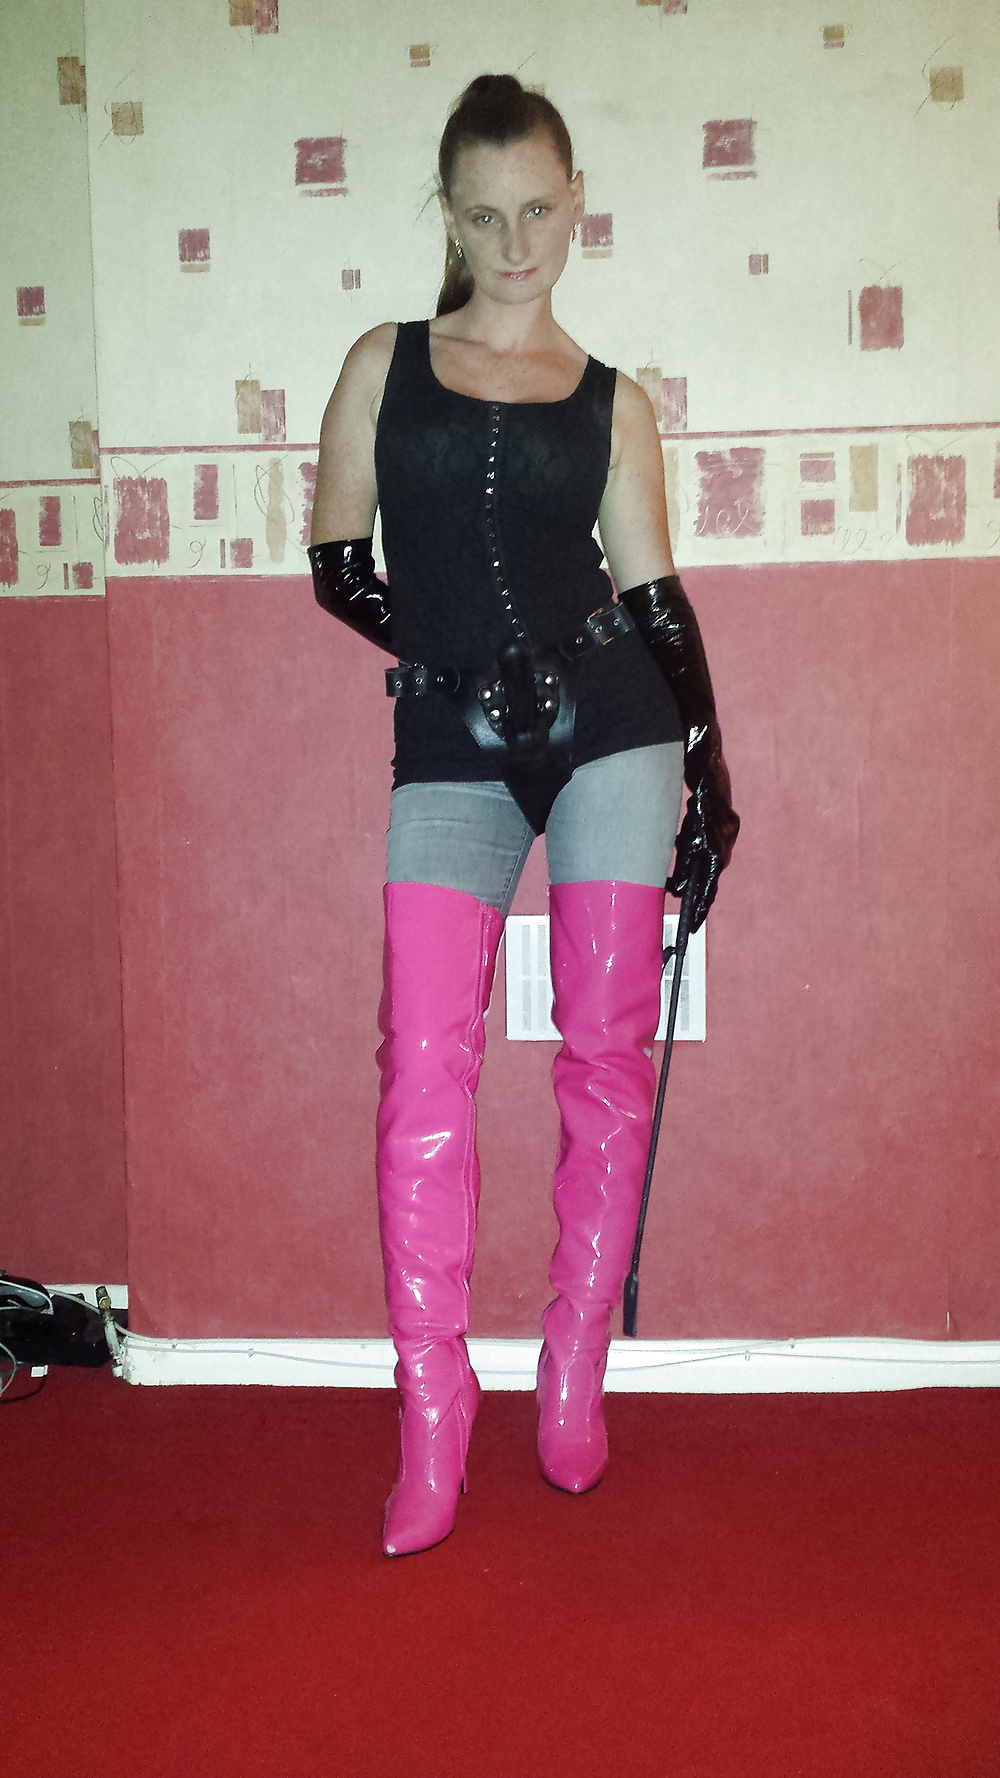 Strapon wearing mistress in pink thigh high boots